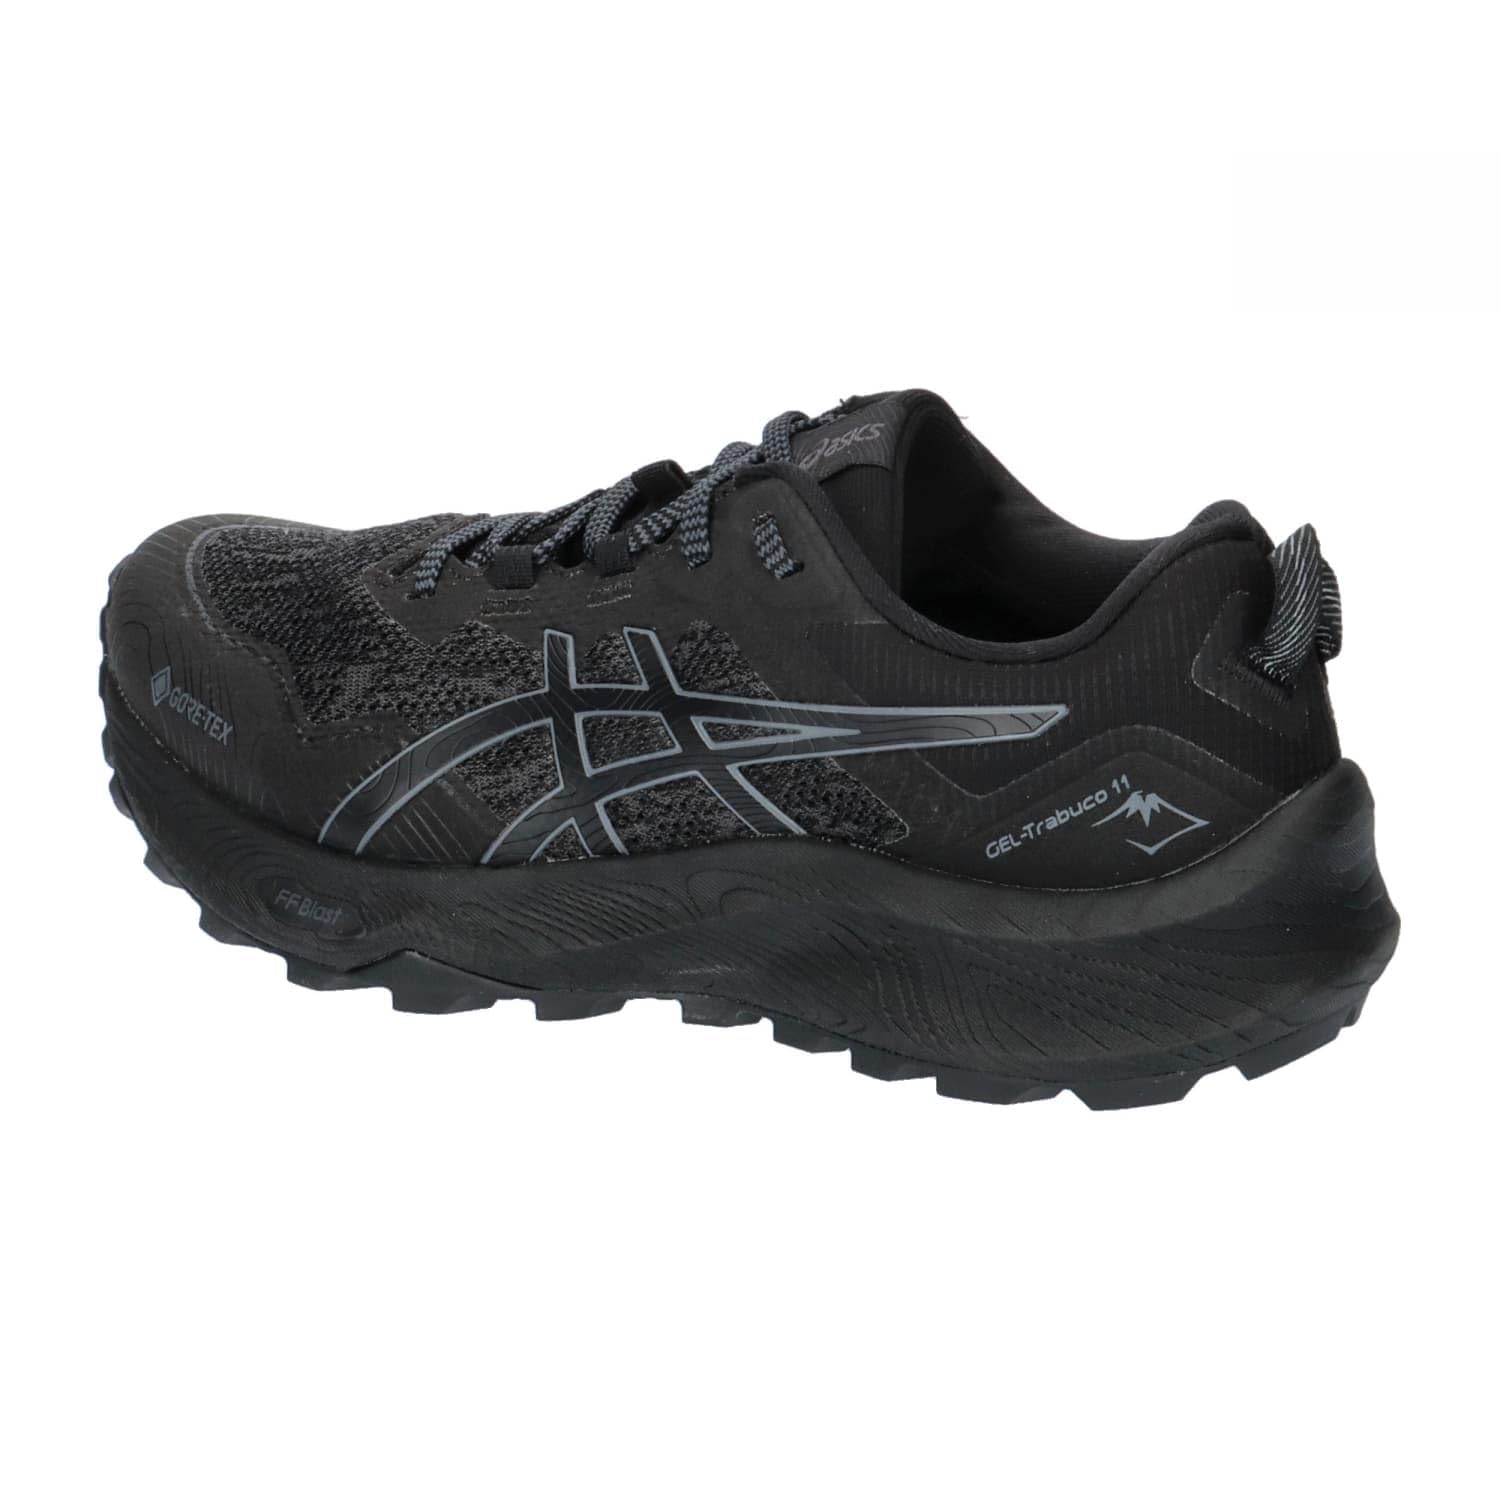 ASICS Women's Trabuco 11 GTX Trainers, Black, Carrier Grey, Black Carrier Grey, 8 US